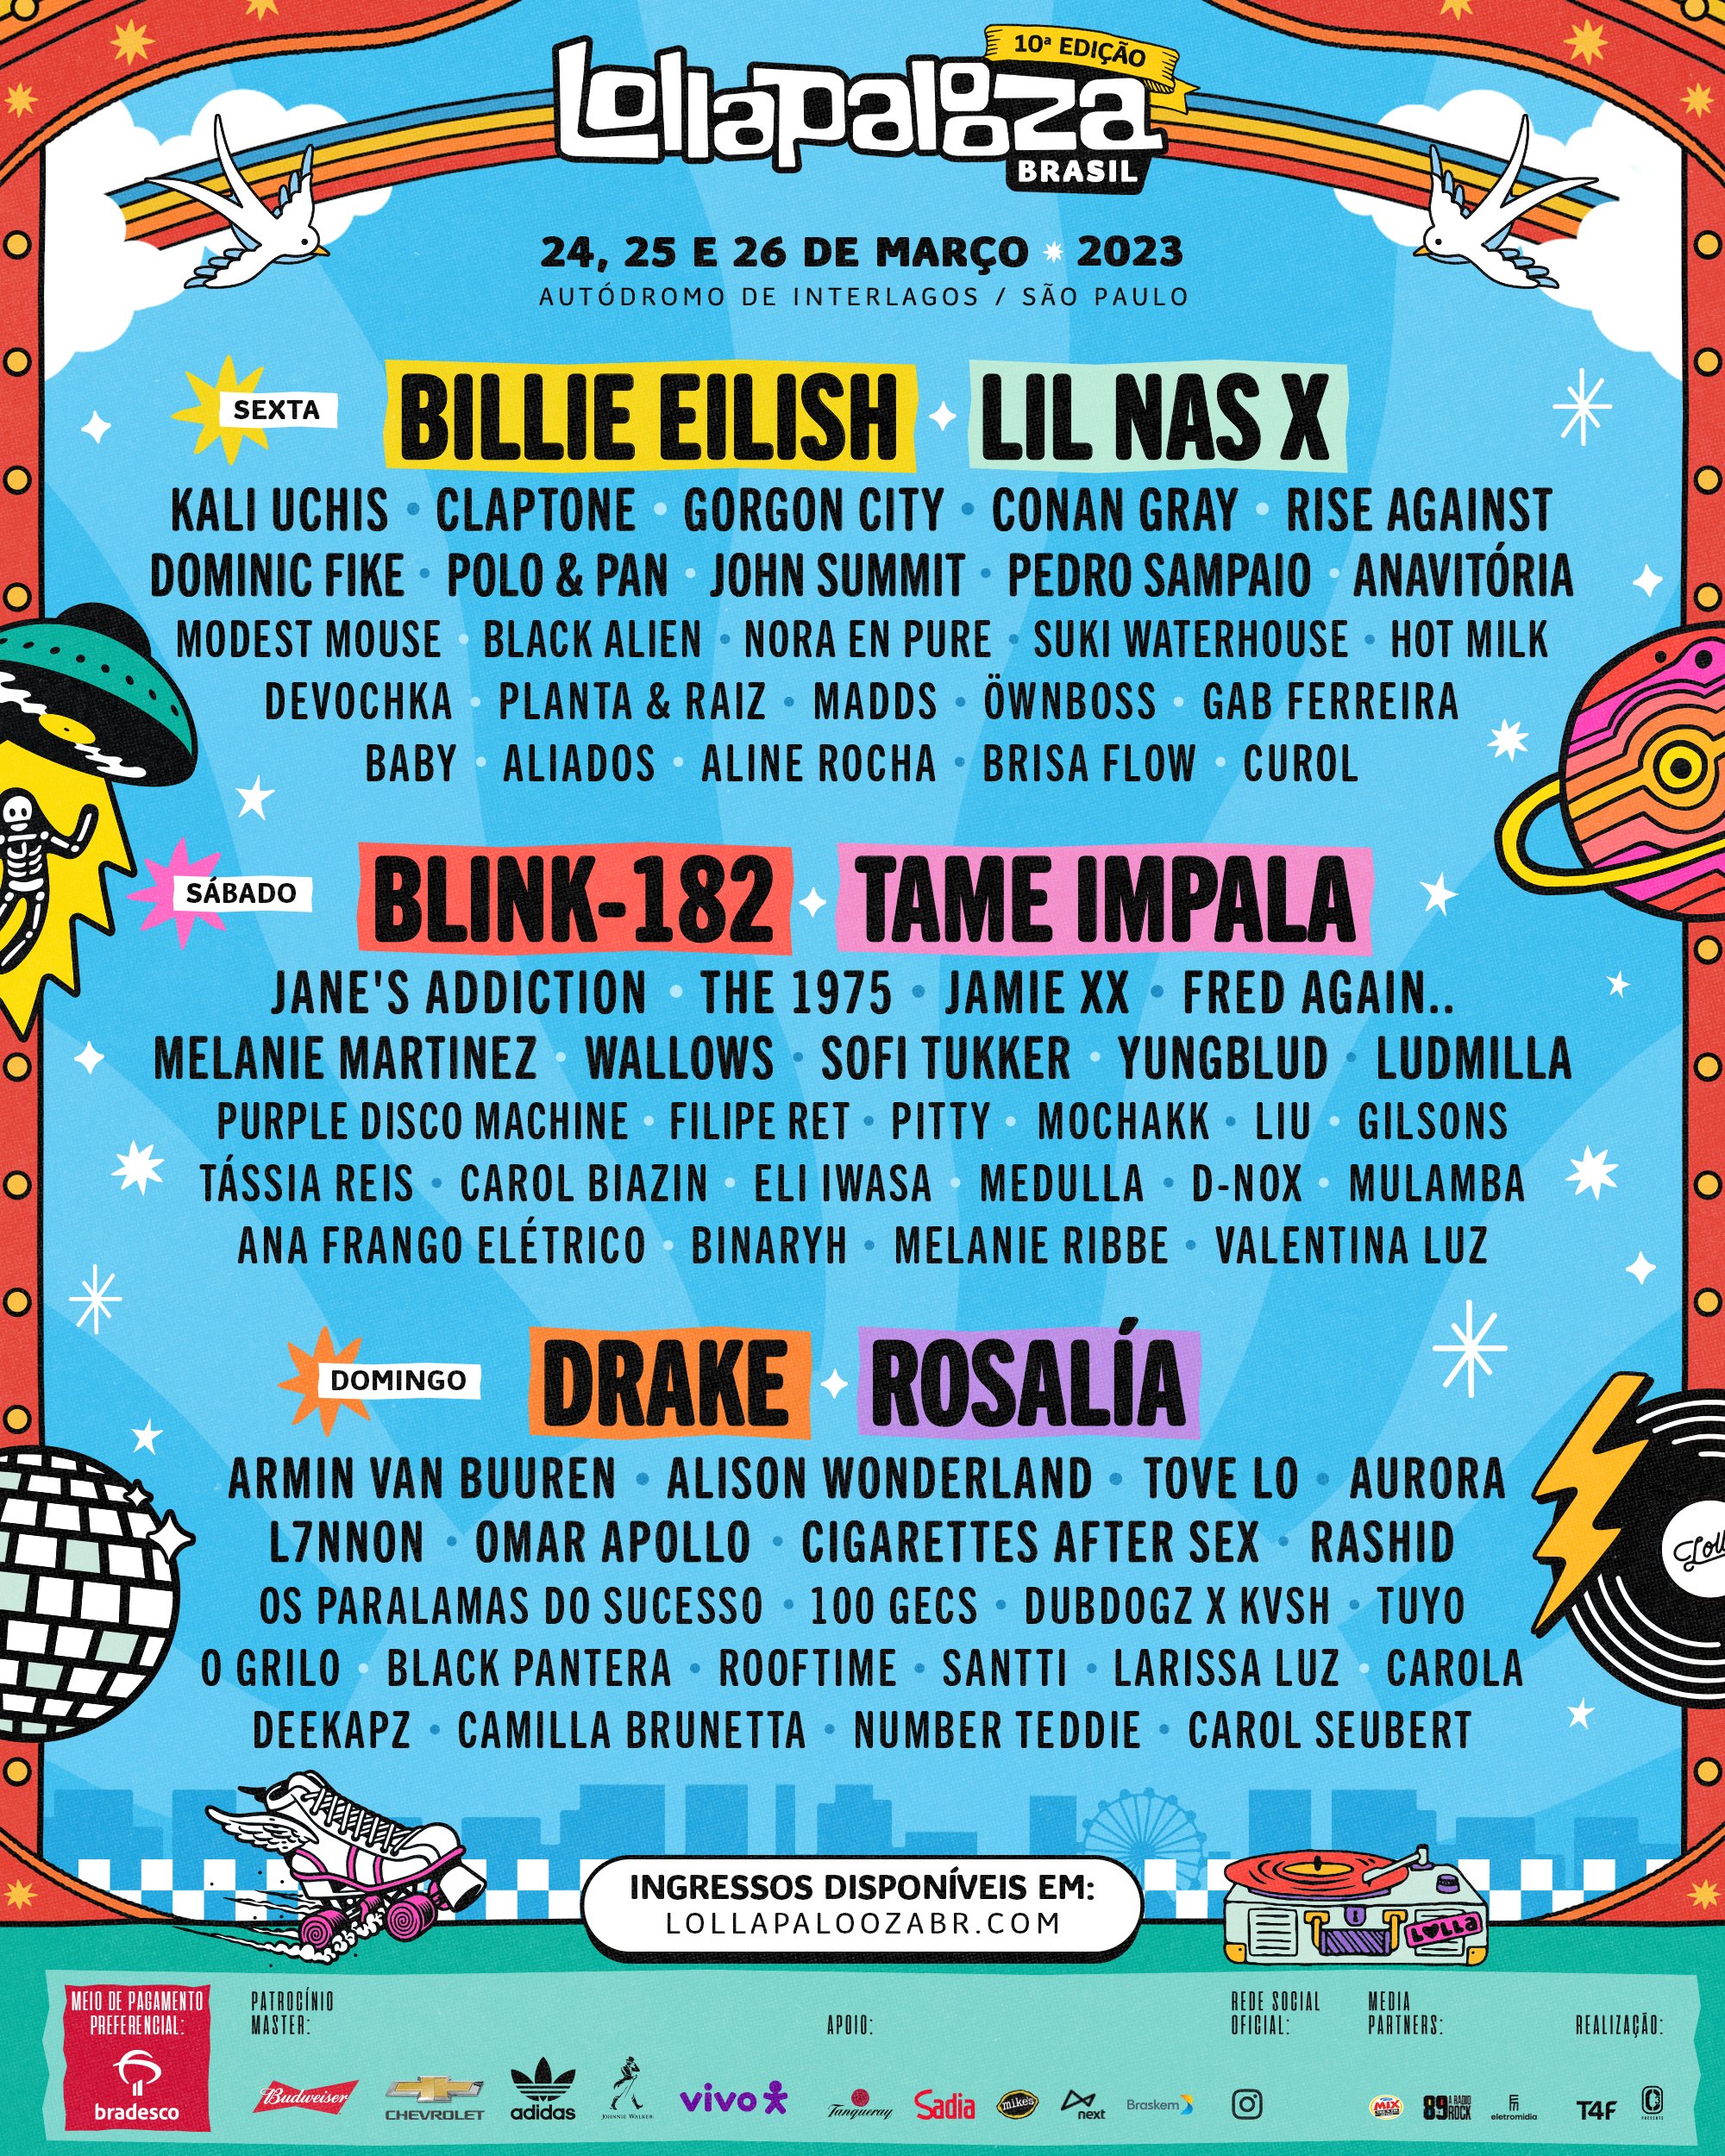 Check out the Lollapalooza Brasil 2023 daily schedule My Crush Live